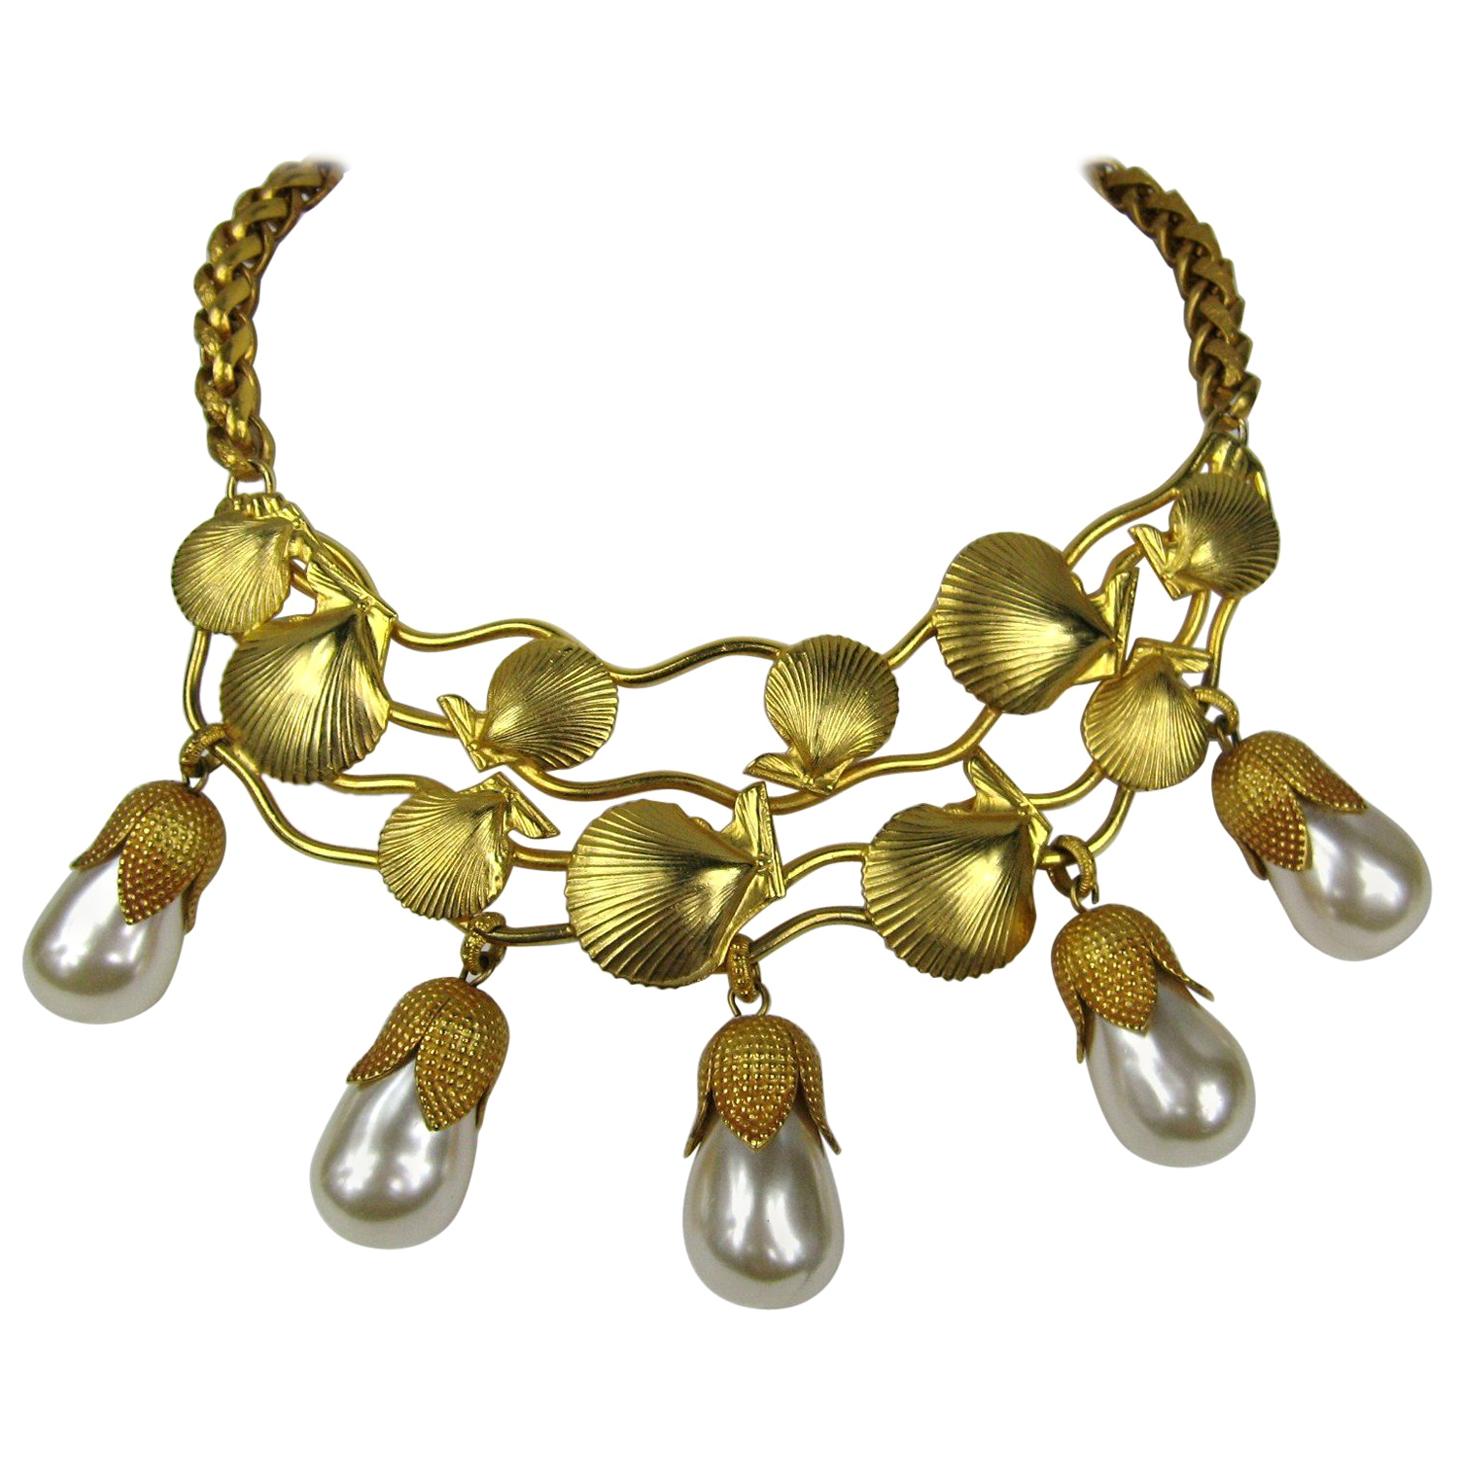  Dominique Aurientis Gold Gilt Sea shell Necklace New, Never worn 1980s For Sale